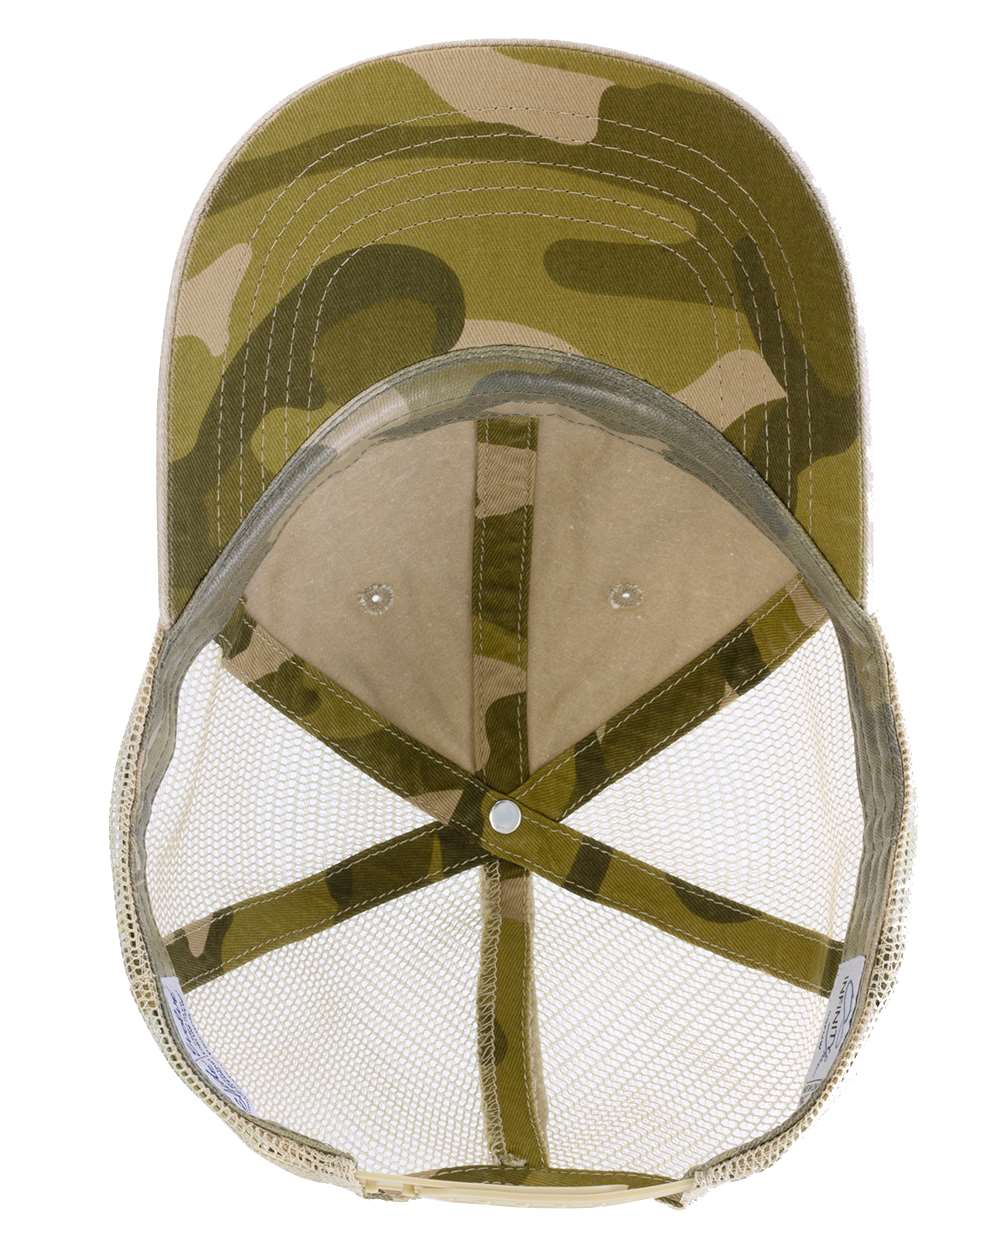 Image of the Kelly Hughes Band Wild Rhythm Cap in Camo Edition, featuring a trendy camouflage pattern and embroidered logo, perfect for adding an edgy touch to your look with style and comfort.